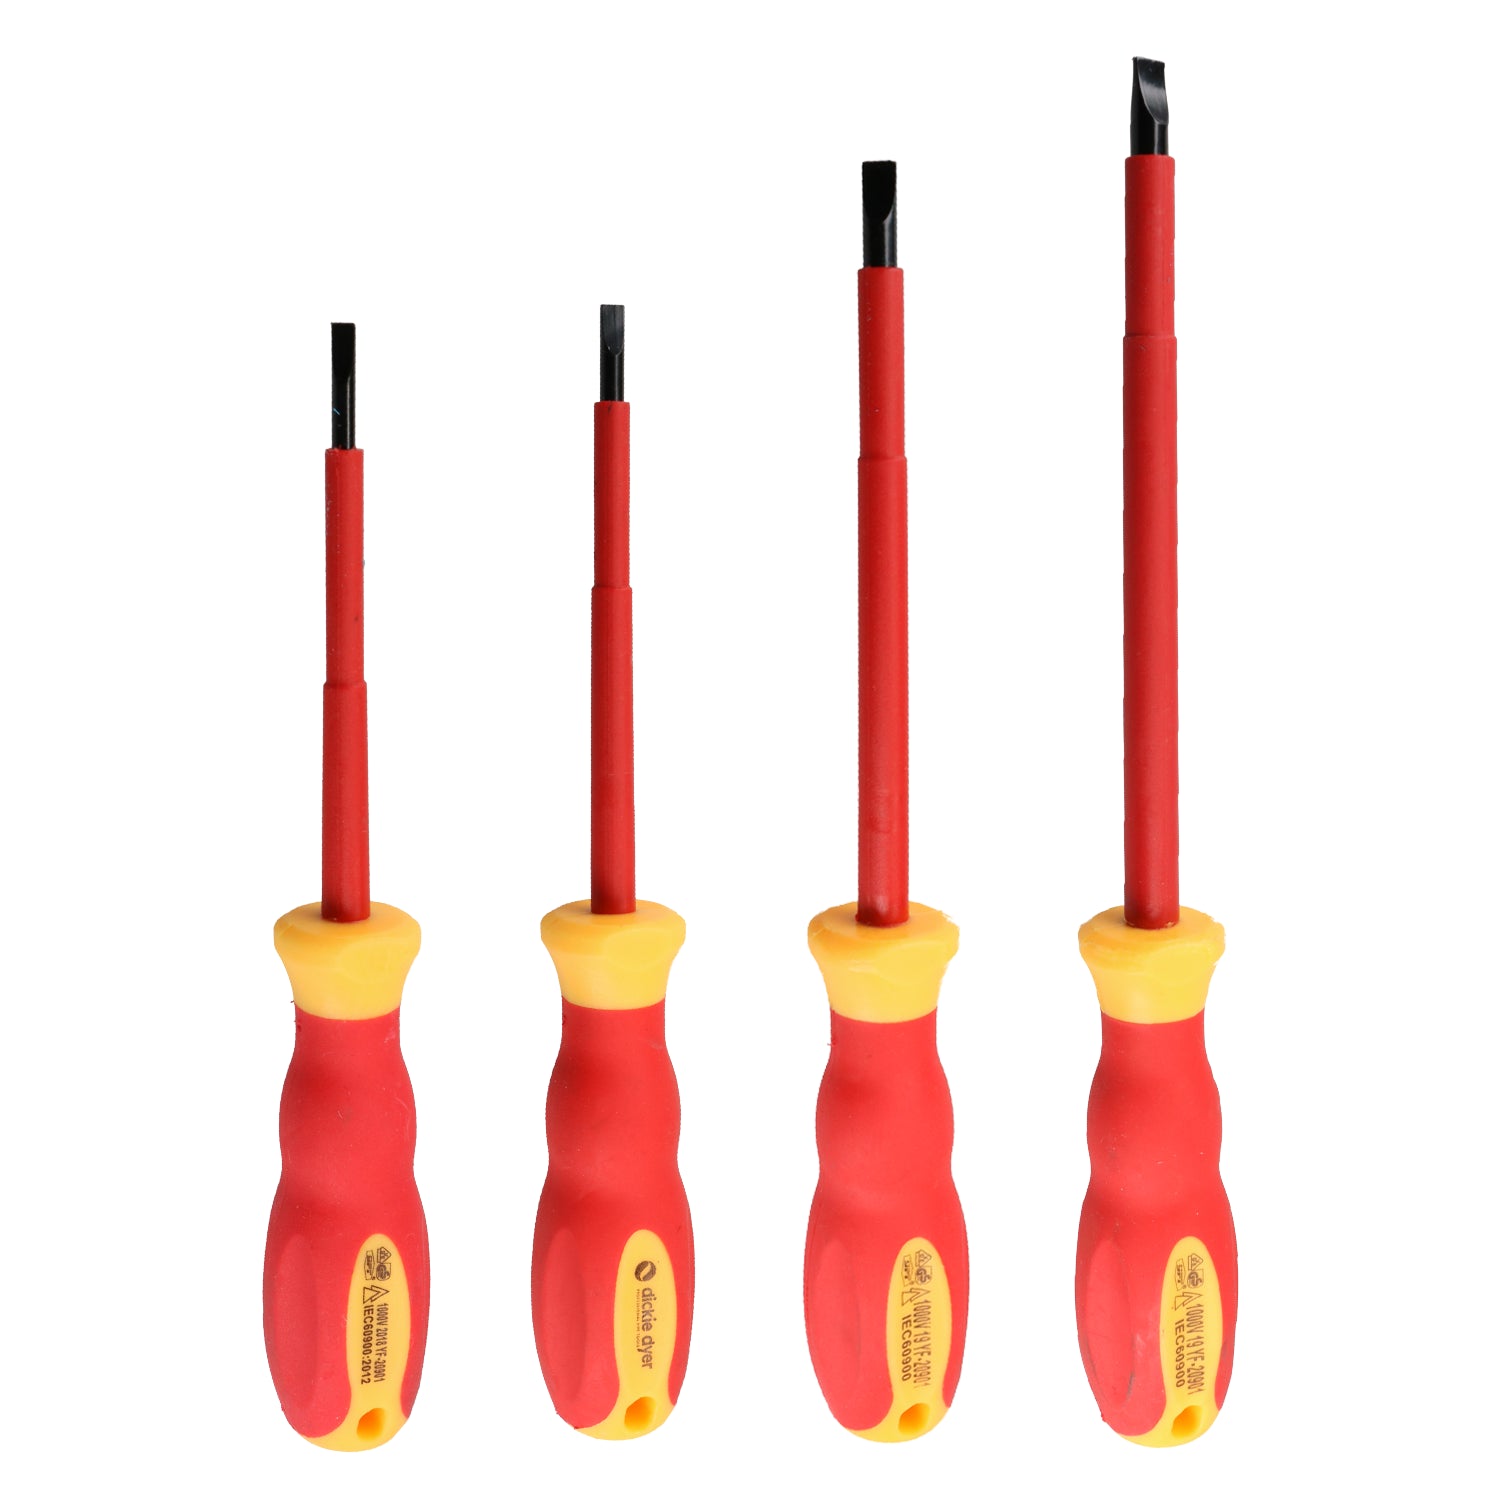 Slotted Pozi PZ Phillips PH VDE Electricians Electrical Screwdrivers Hybrid Use